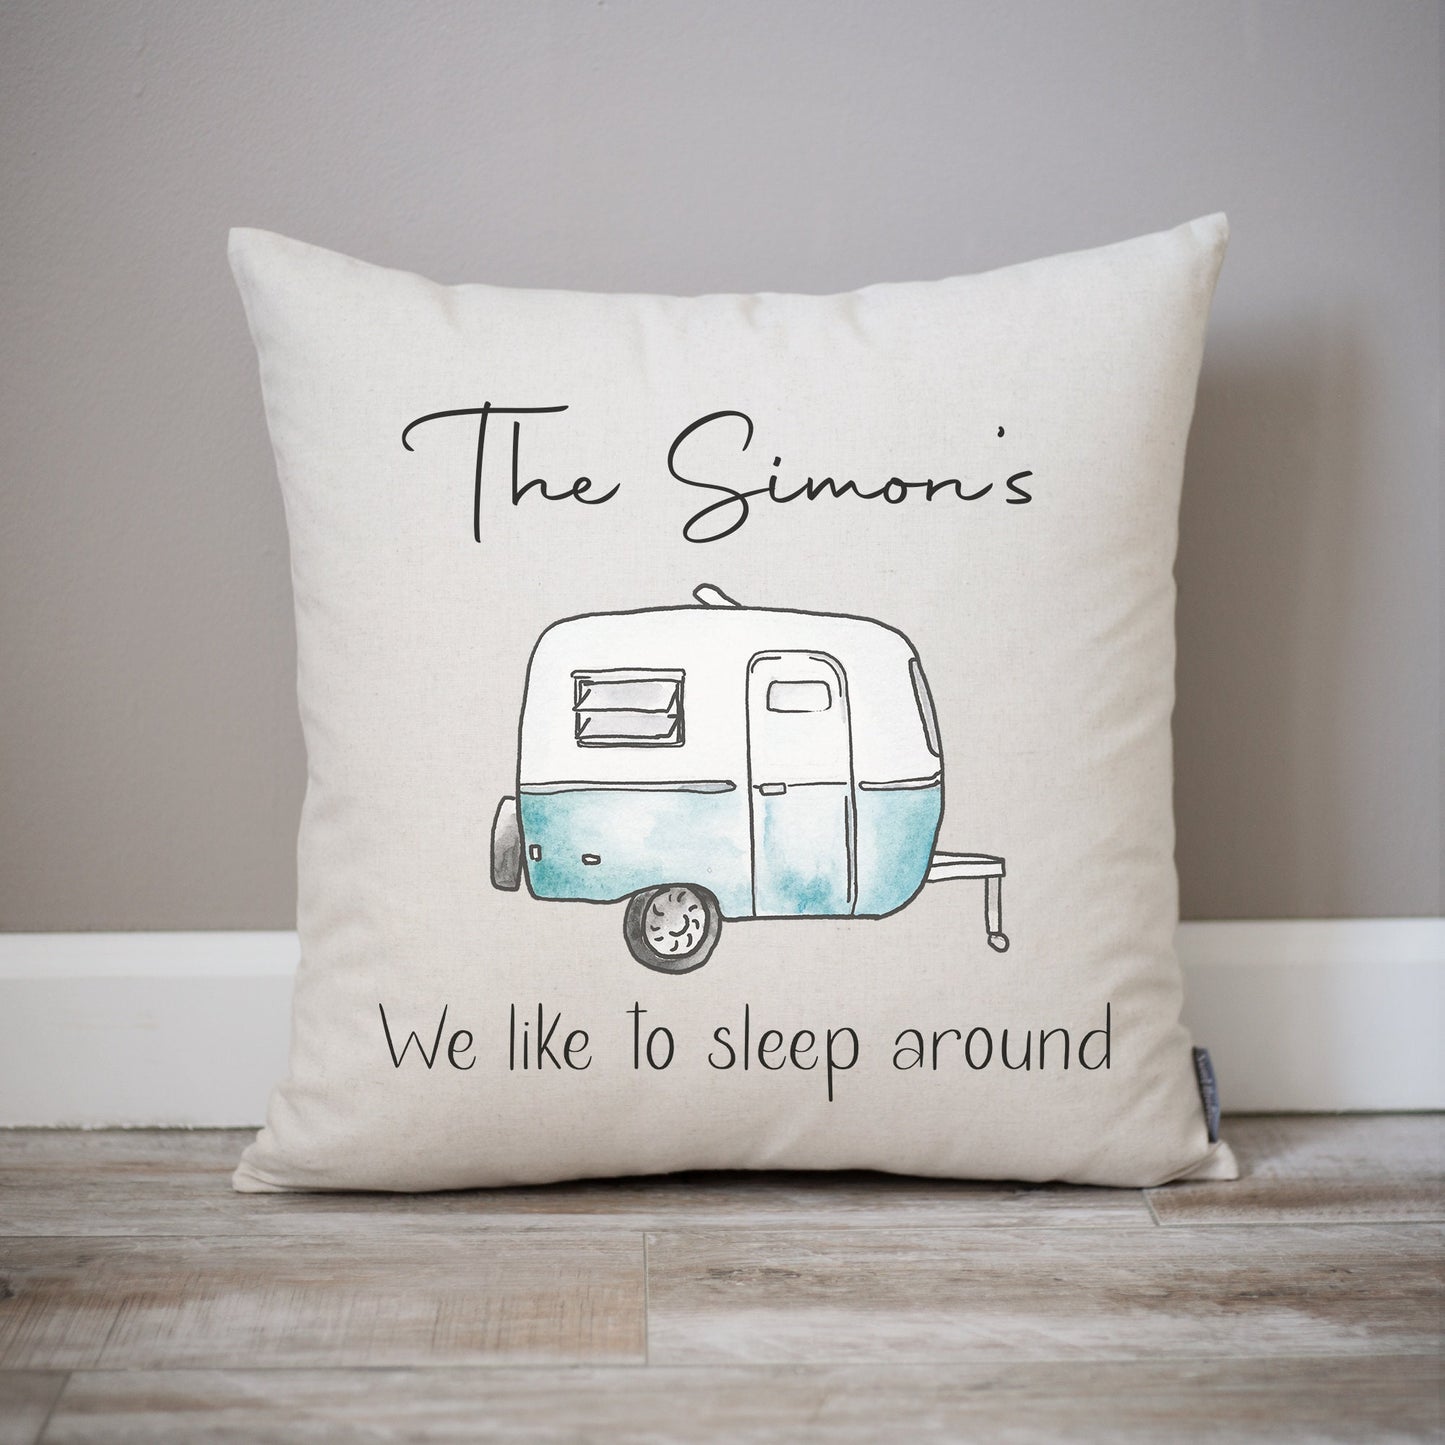 We Like to Sleep Around Camper Pillow | Camper Gift Ideas | Customizable RV Decor | Fifth Wheel Camper Personalized Gift | Campsite Pillow